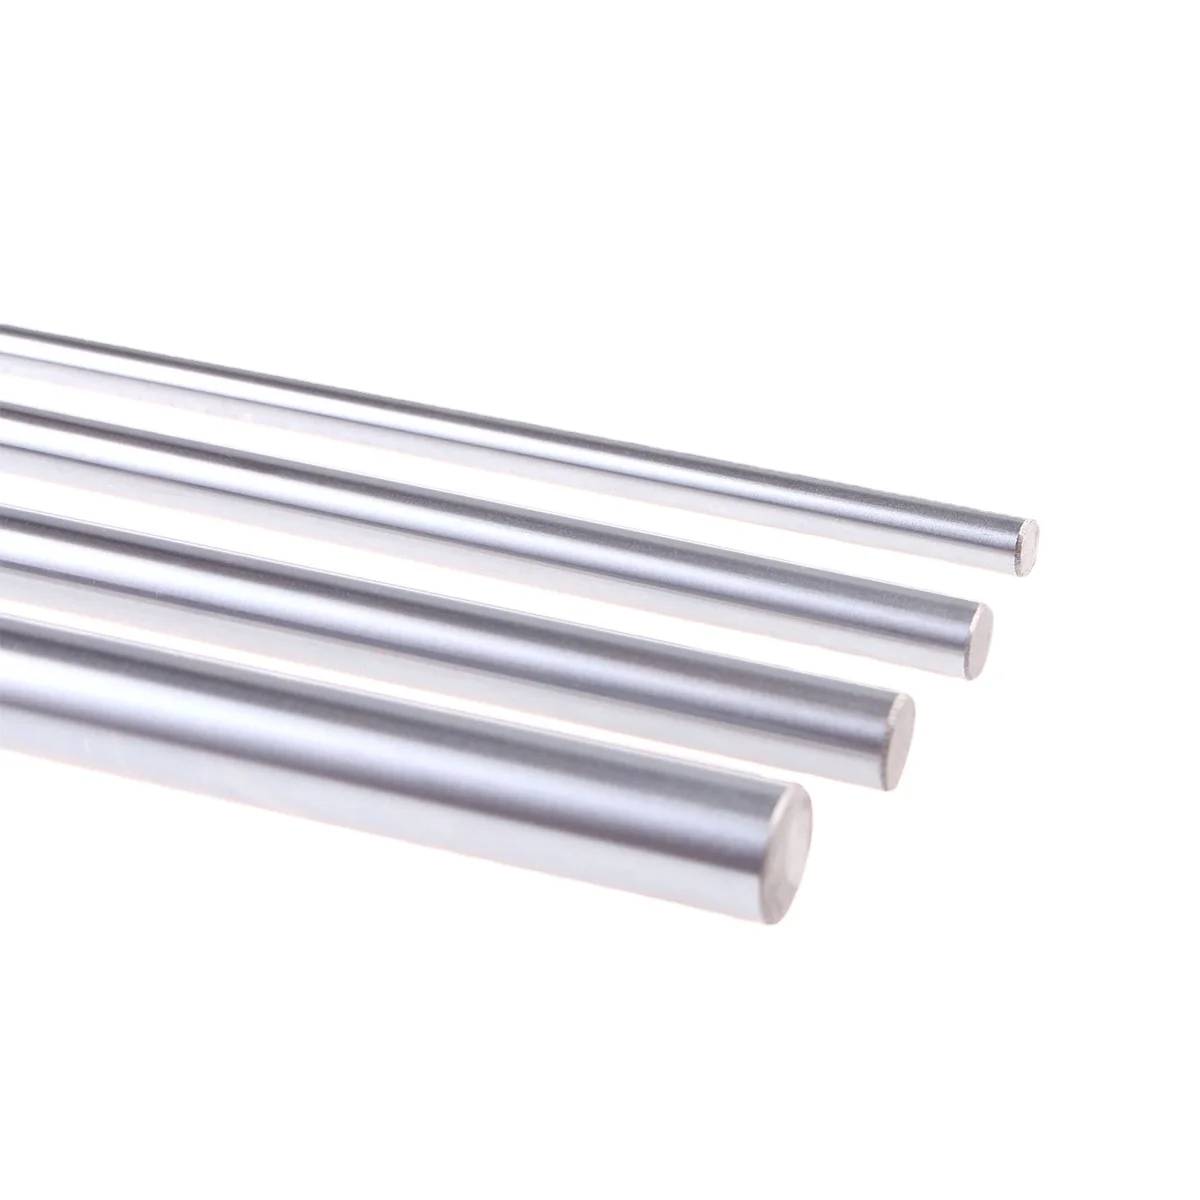 2pcs 6mm 8mm 10mm 12mm OD Linear Shaft Cylinder Rail Chrome Plated Round Smooth Rods Optical Axis for CNC 3D Printer Parts optical axis d10mm 200 300 350 400 500 mm smooth rods linear shaft rail 3d printers parts chrome plated guide slide part